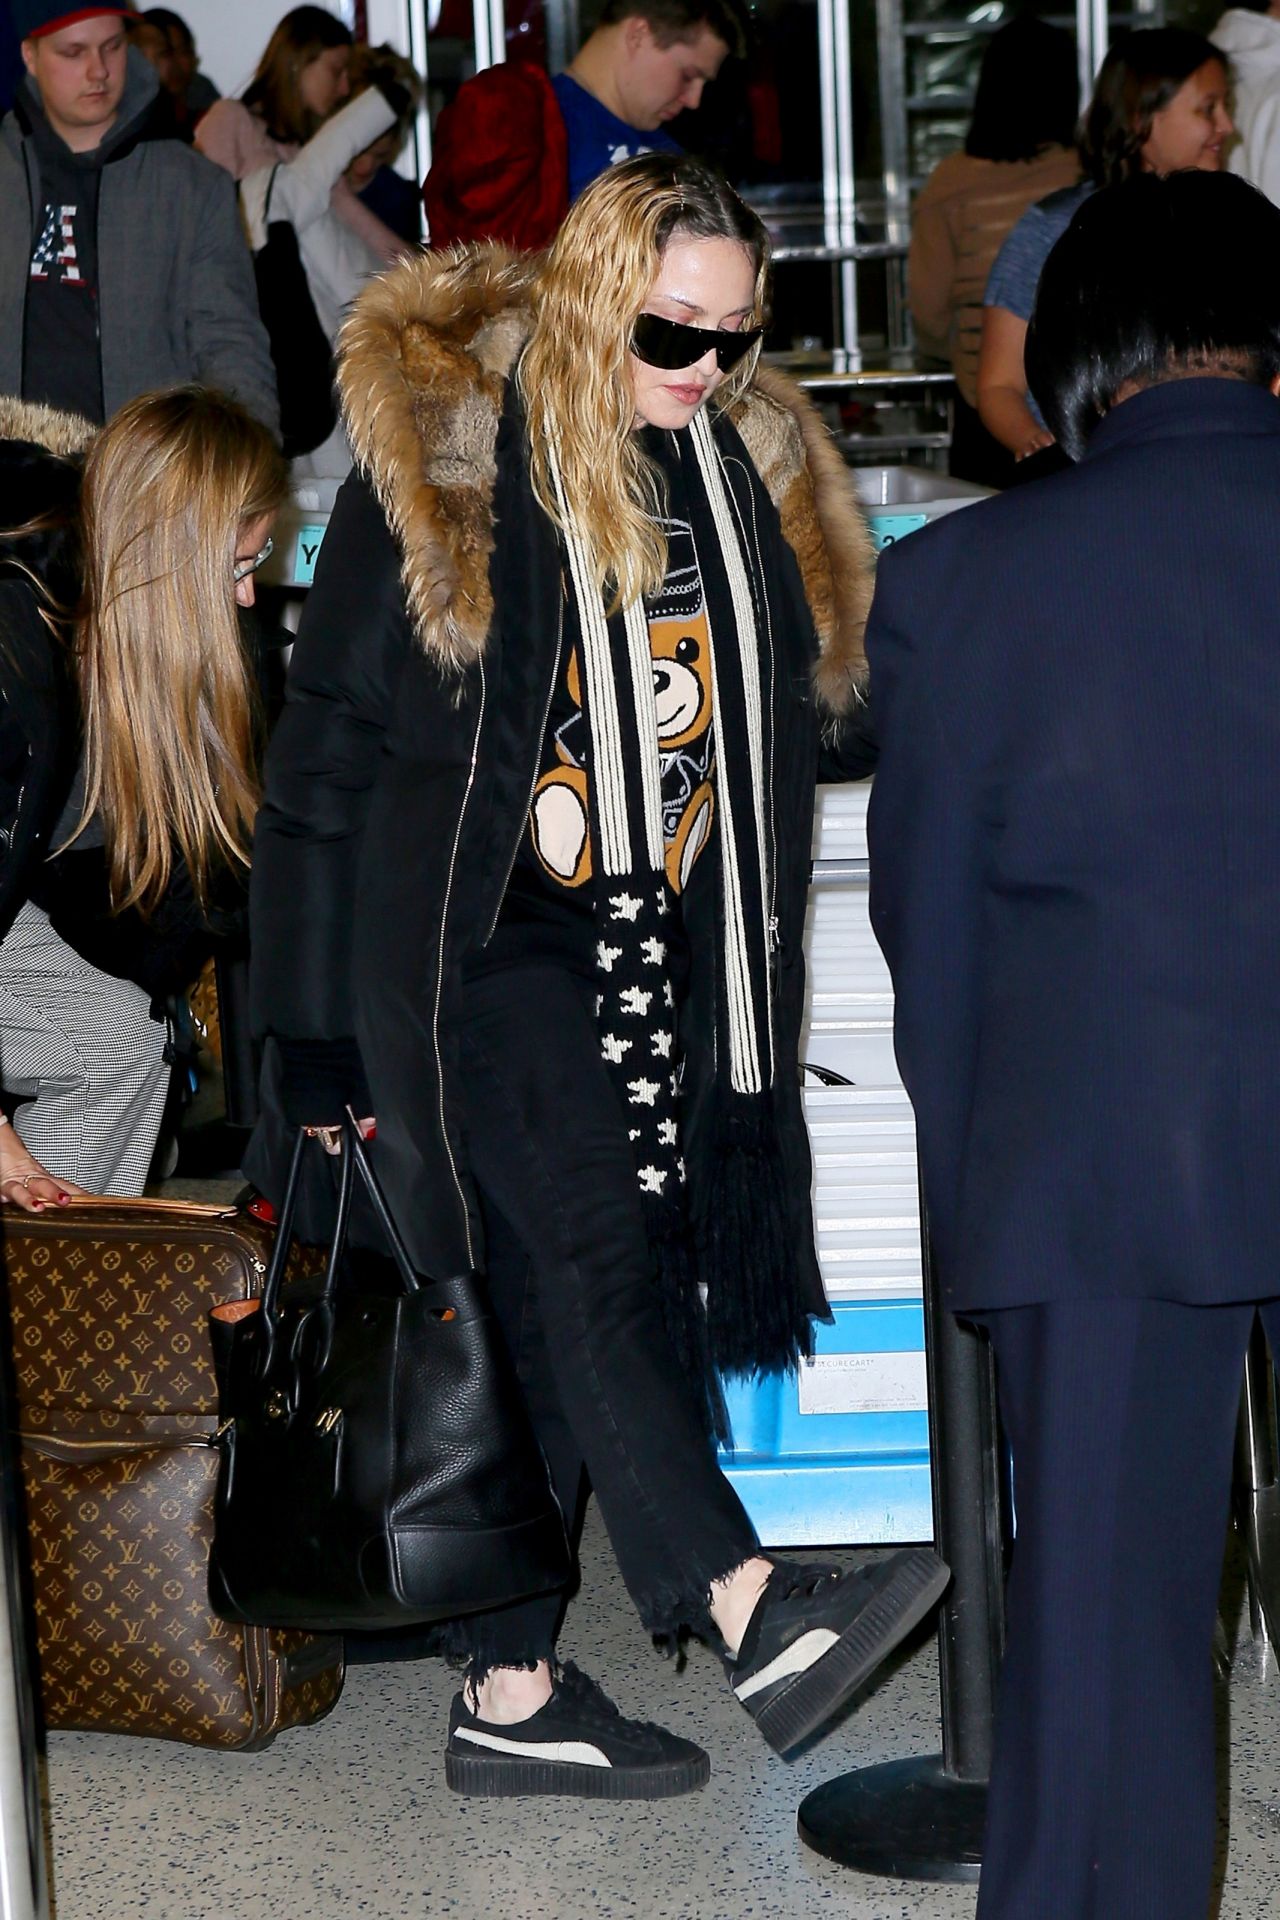 Madonna at JFK Airport in New York 12/20/ 20161280 x 1920